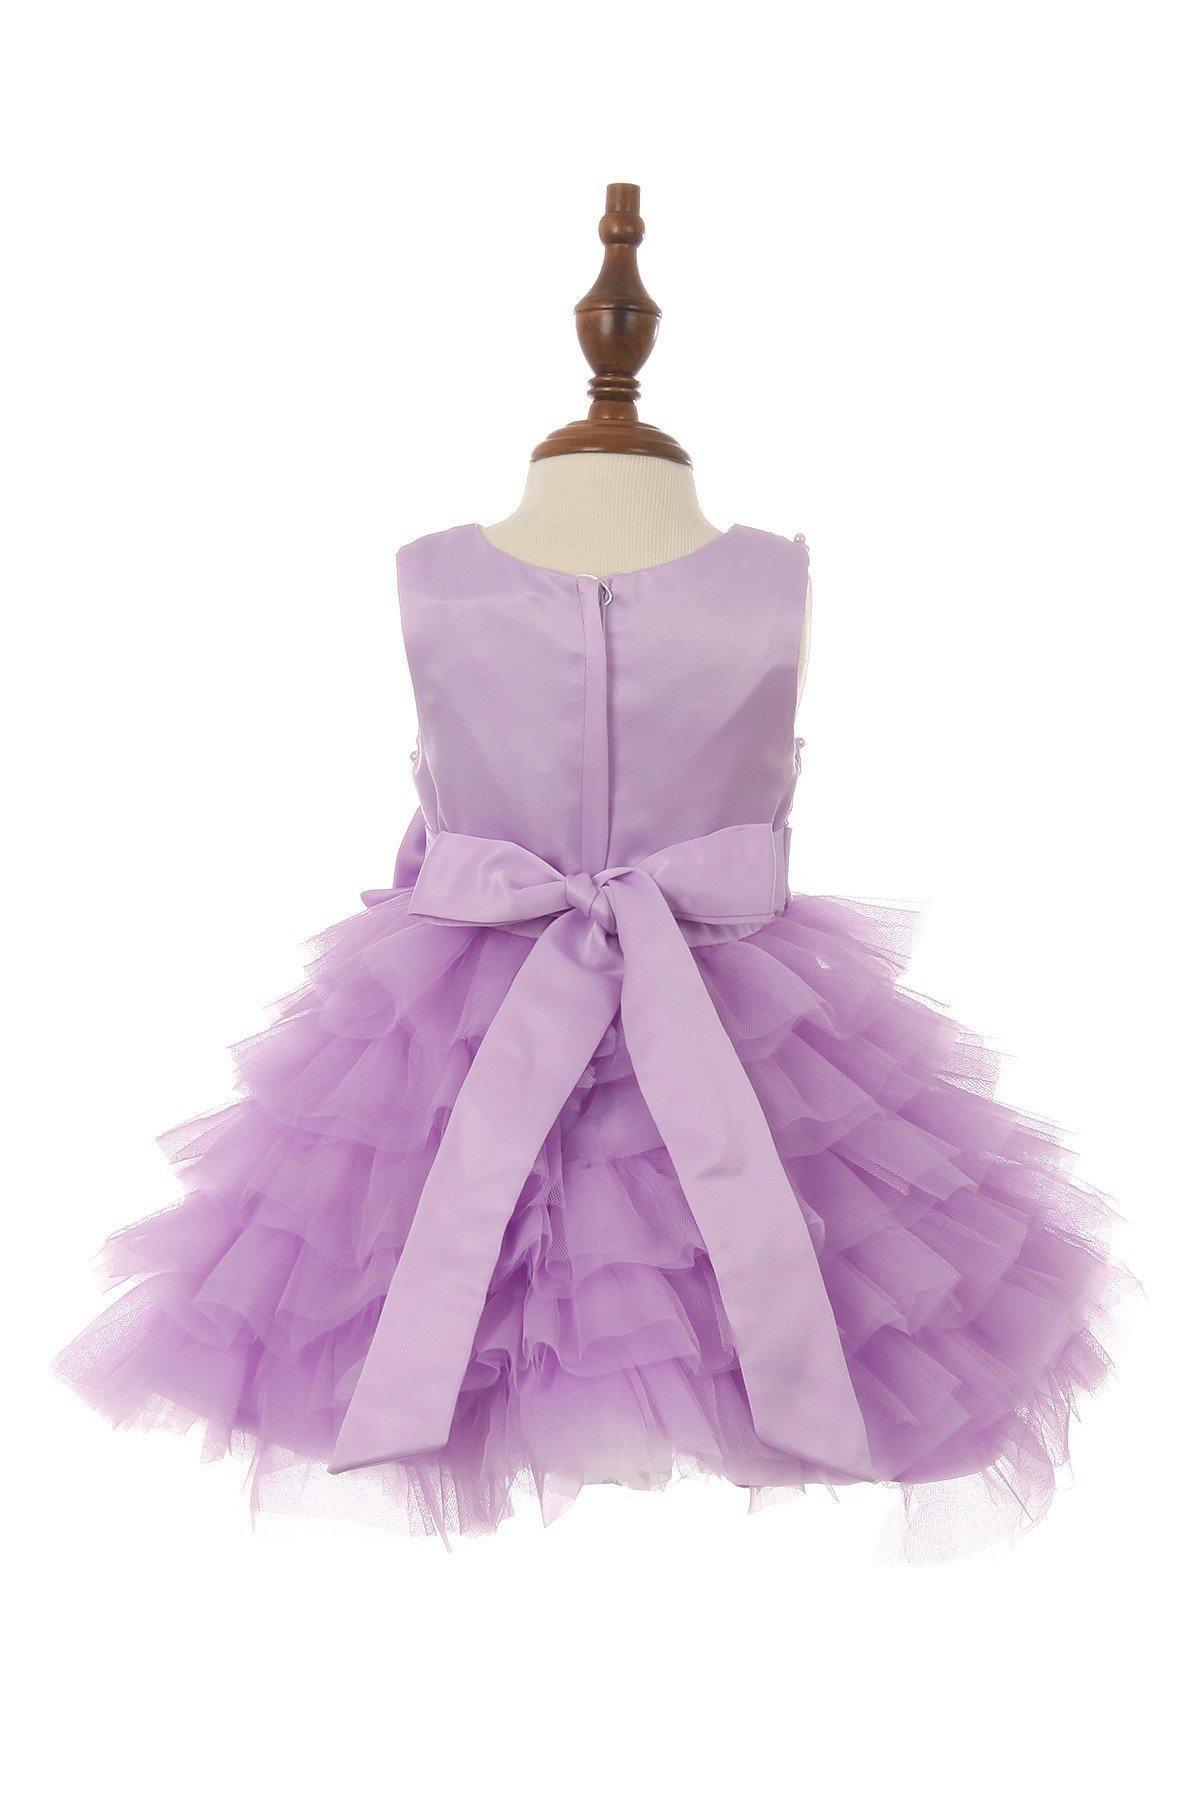 Brocade and Pleated Tulle Flower Girls Dress - The Dress Outlet Cinderella Couture